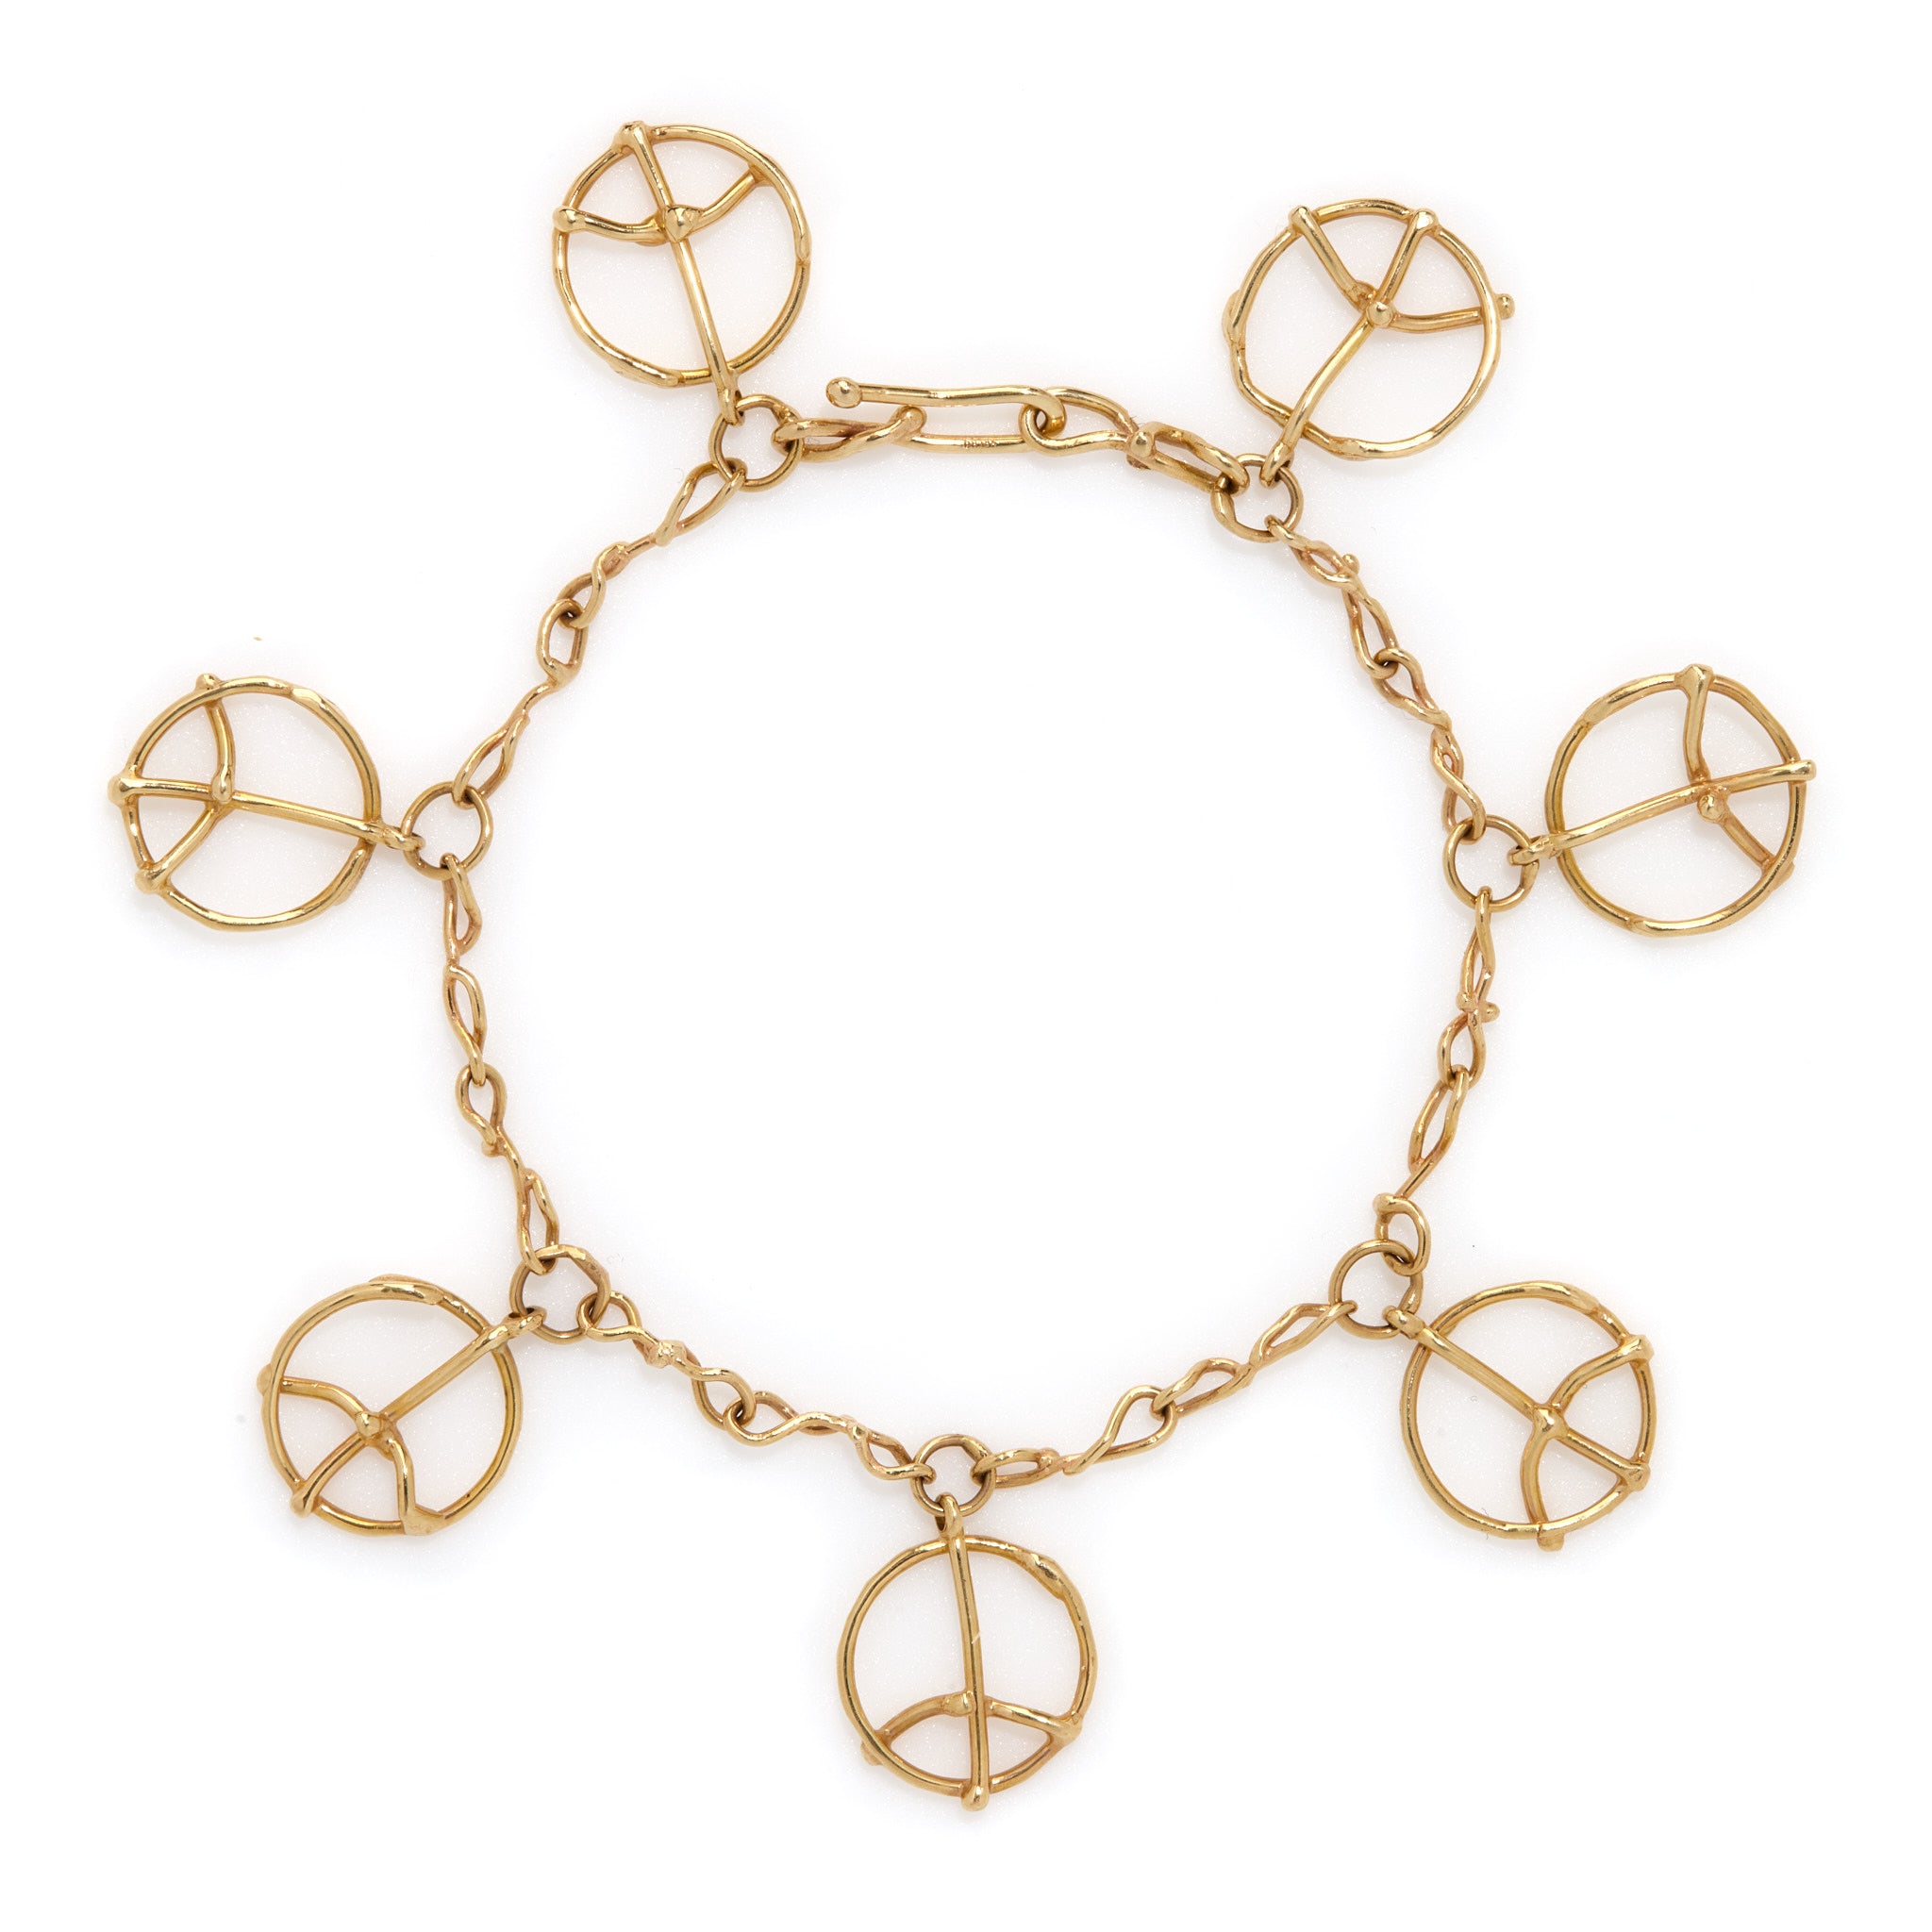 18k yellow gold "7 signs of peace" bracelet